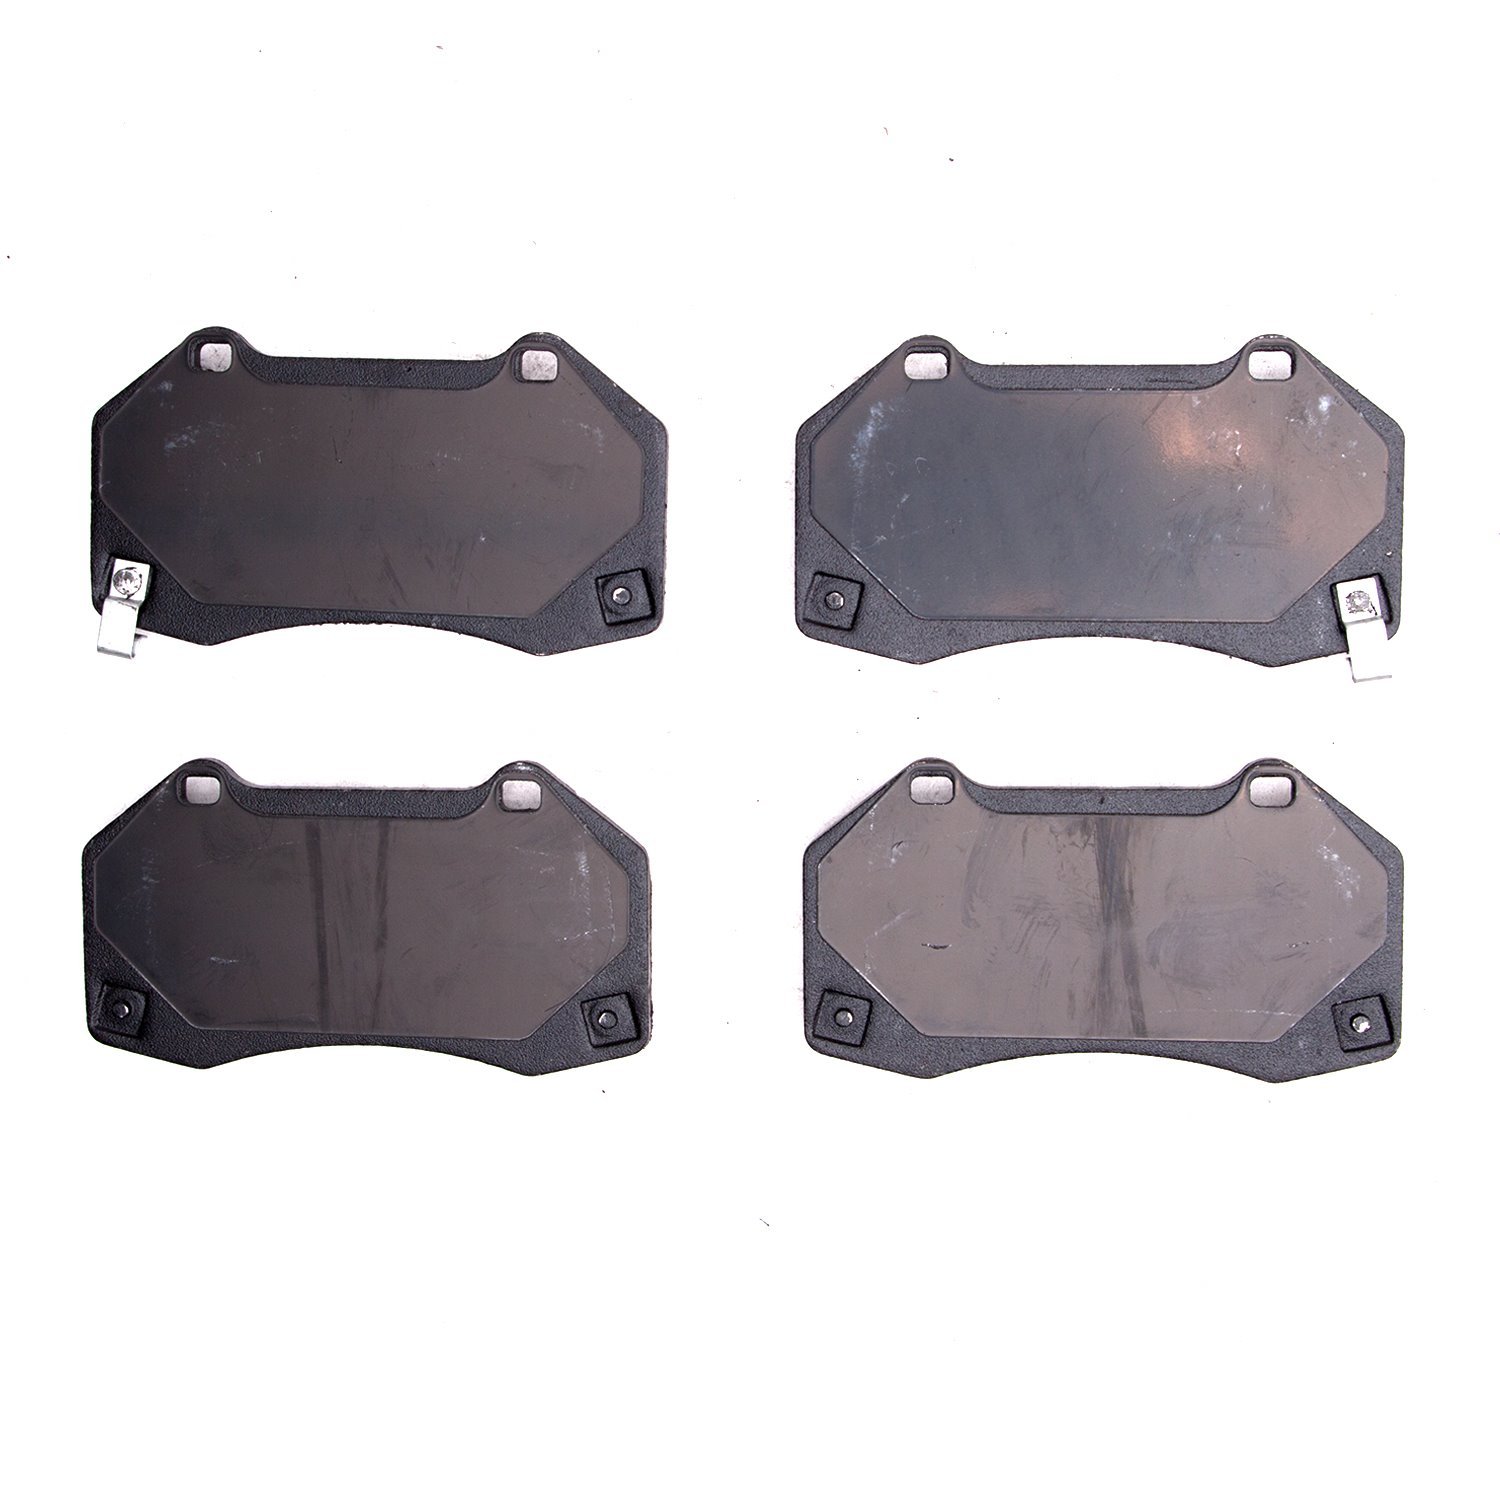 1000-1379-20 Track/Street Low-Metallic Brake Pads Kit, Fits Select Multiple Makes/Models, Position: Front